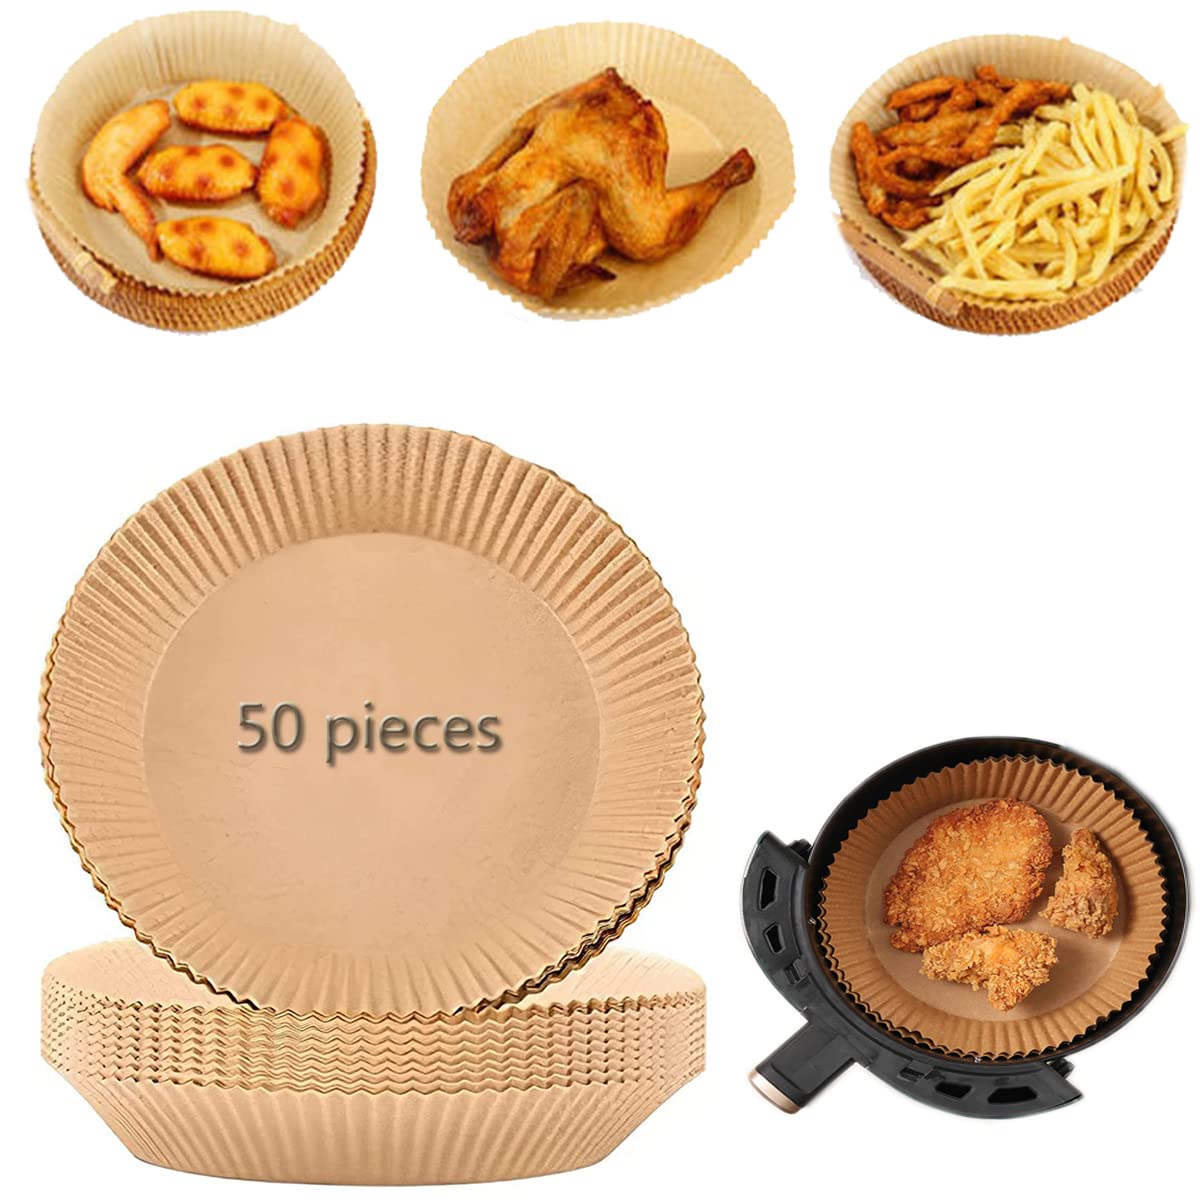 50 Pcs 6.3 inch Air Fryer Disposable Paper Liner,Large Non-stick Disposable Water-Proof,Food Grade Baking Paper for Air Fryer Accessories,Steamer,Bakeware, Roasting Microwave